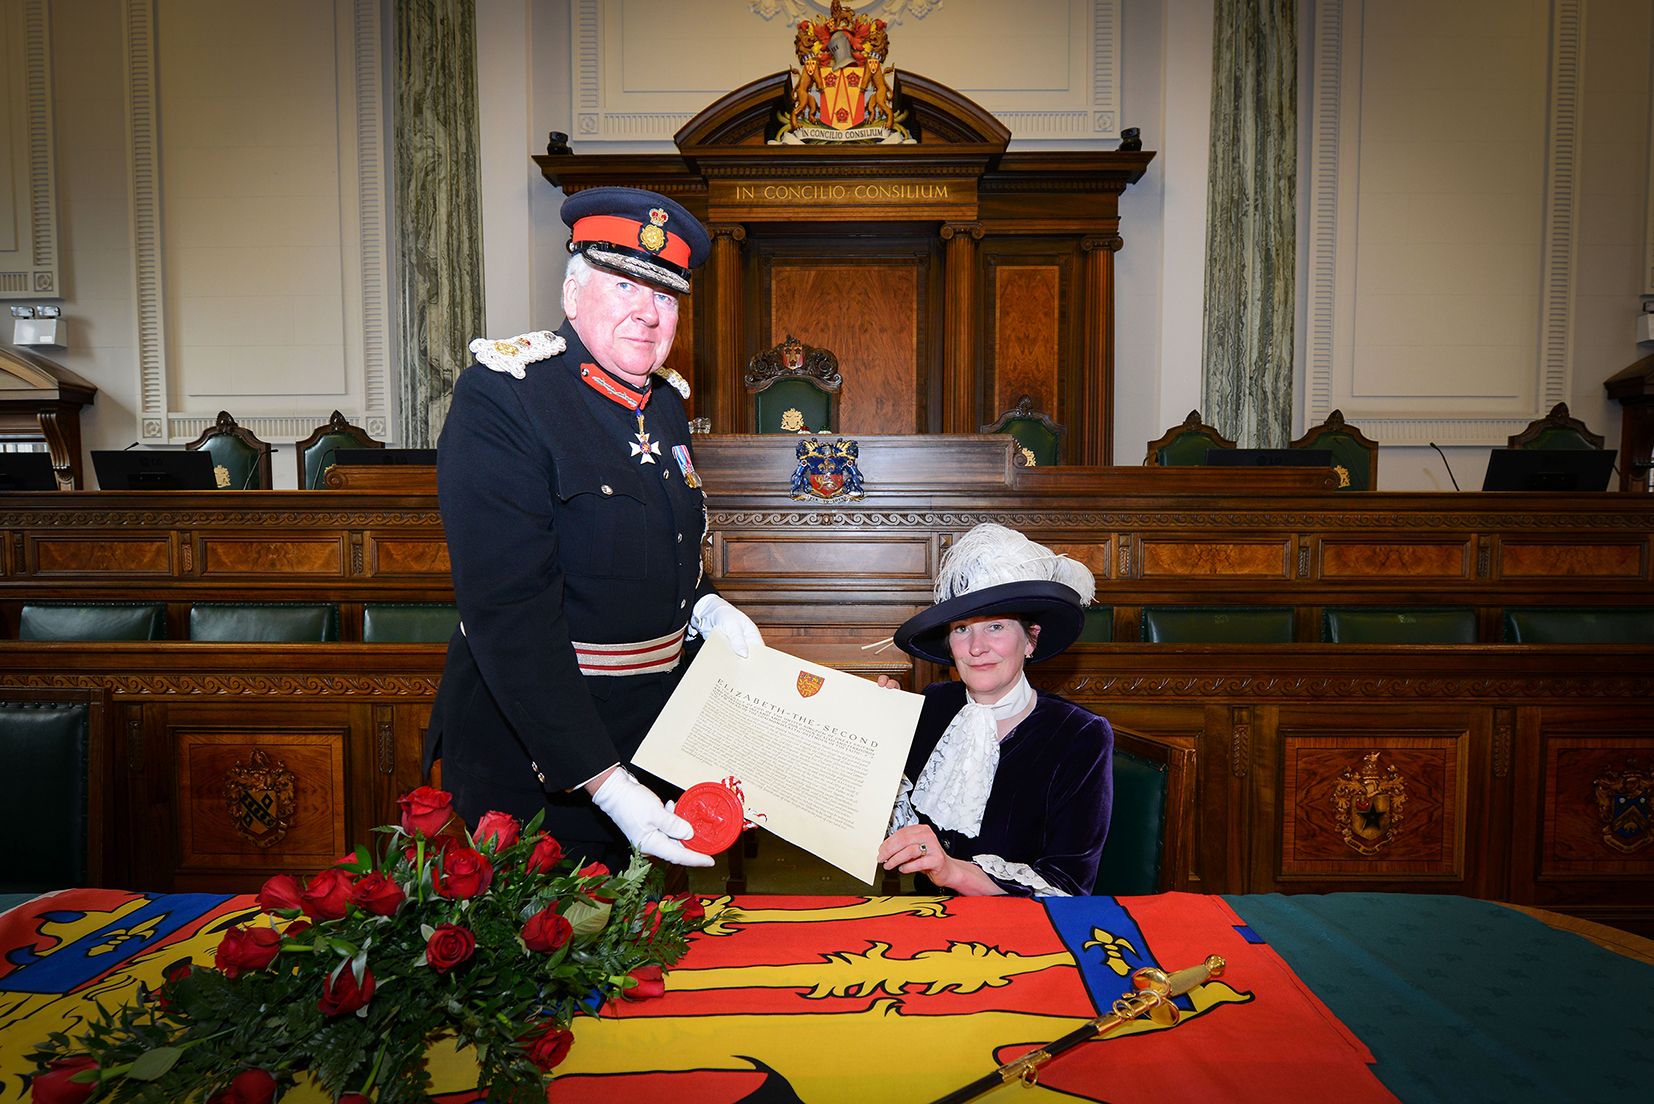 The new High Sheriff of Lancashire takes office | | Skem News - The Top